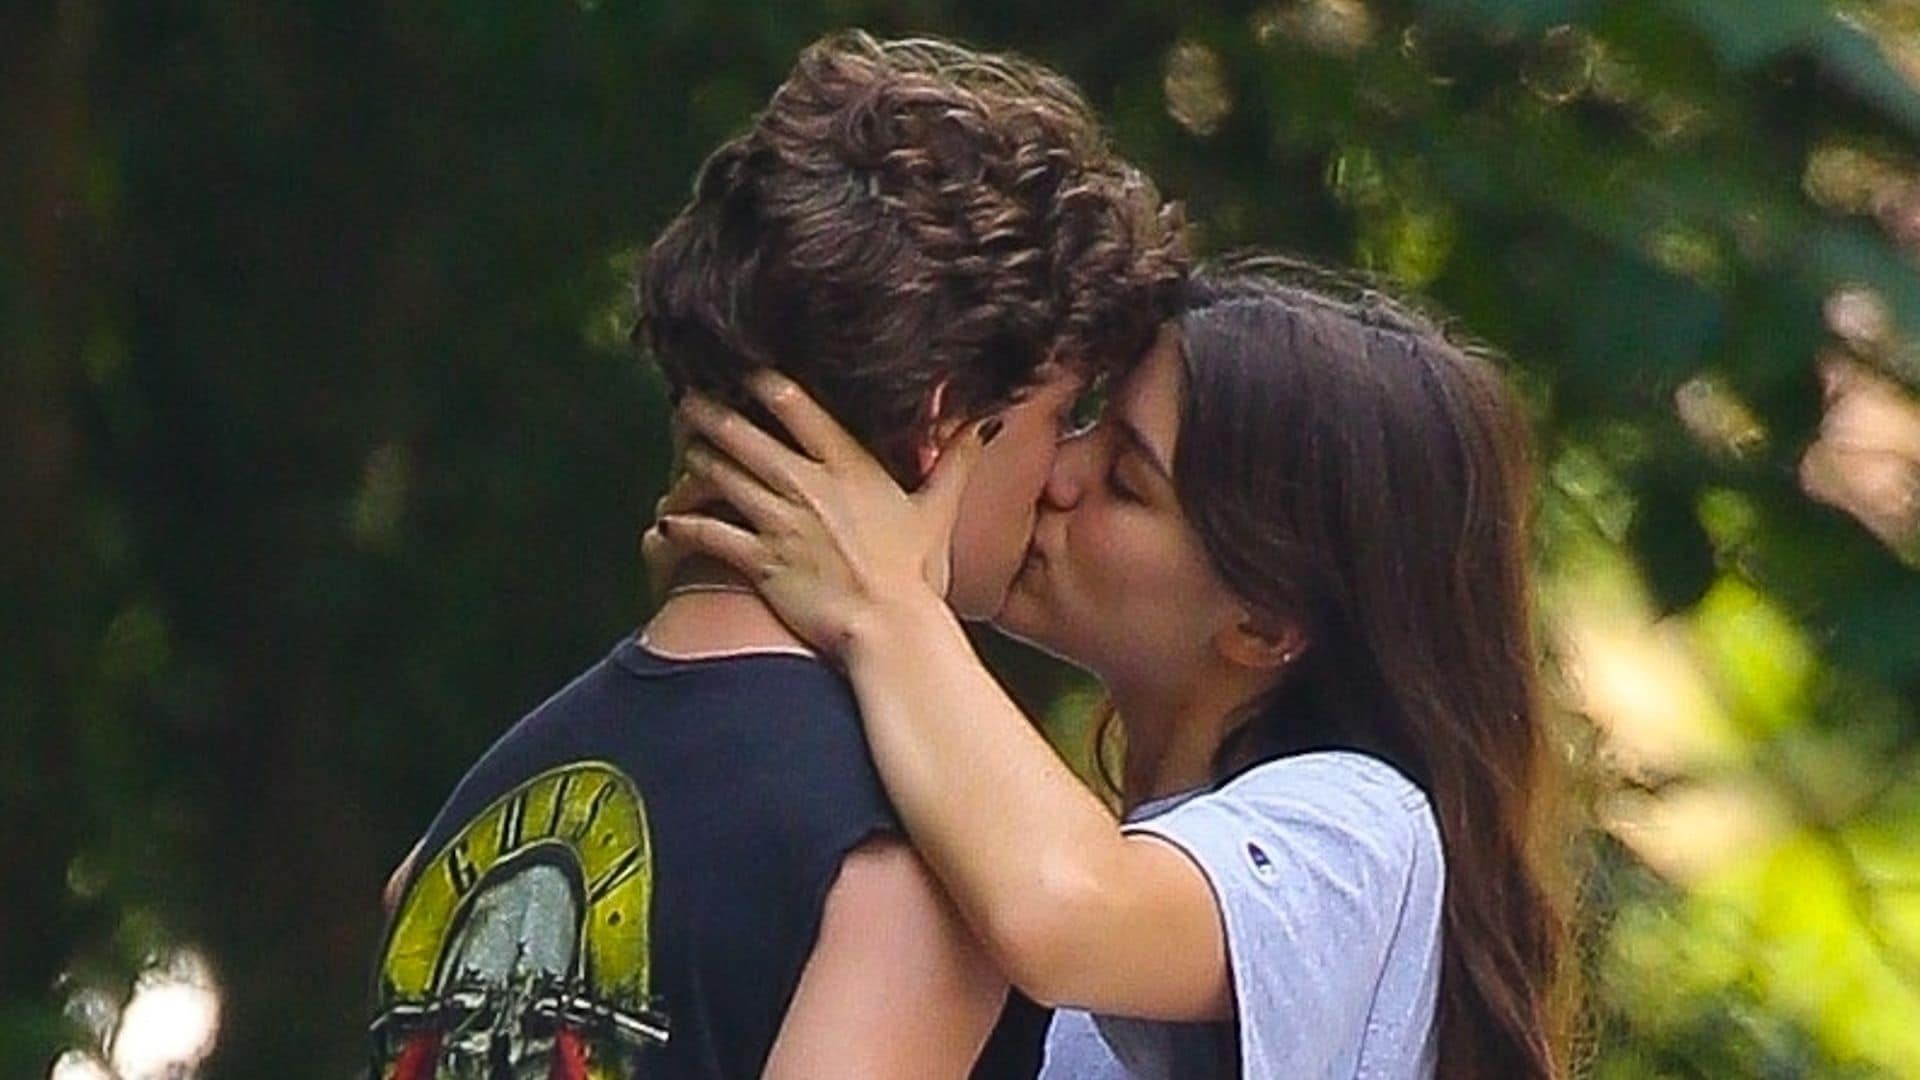 Suri and her boyfriend share some PDA in the park